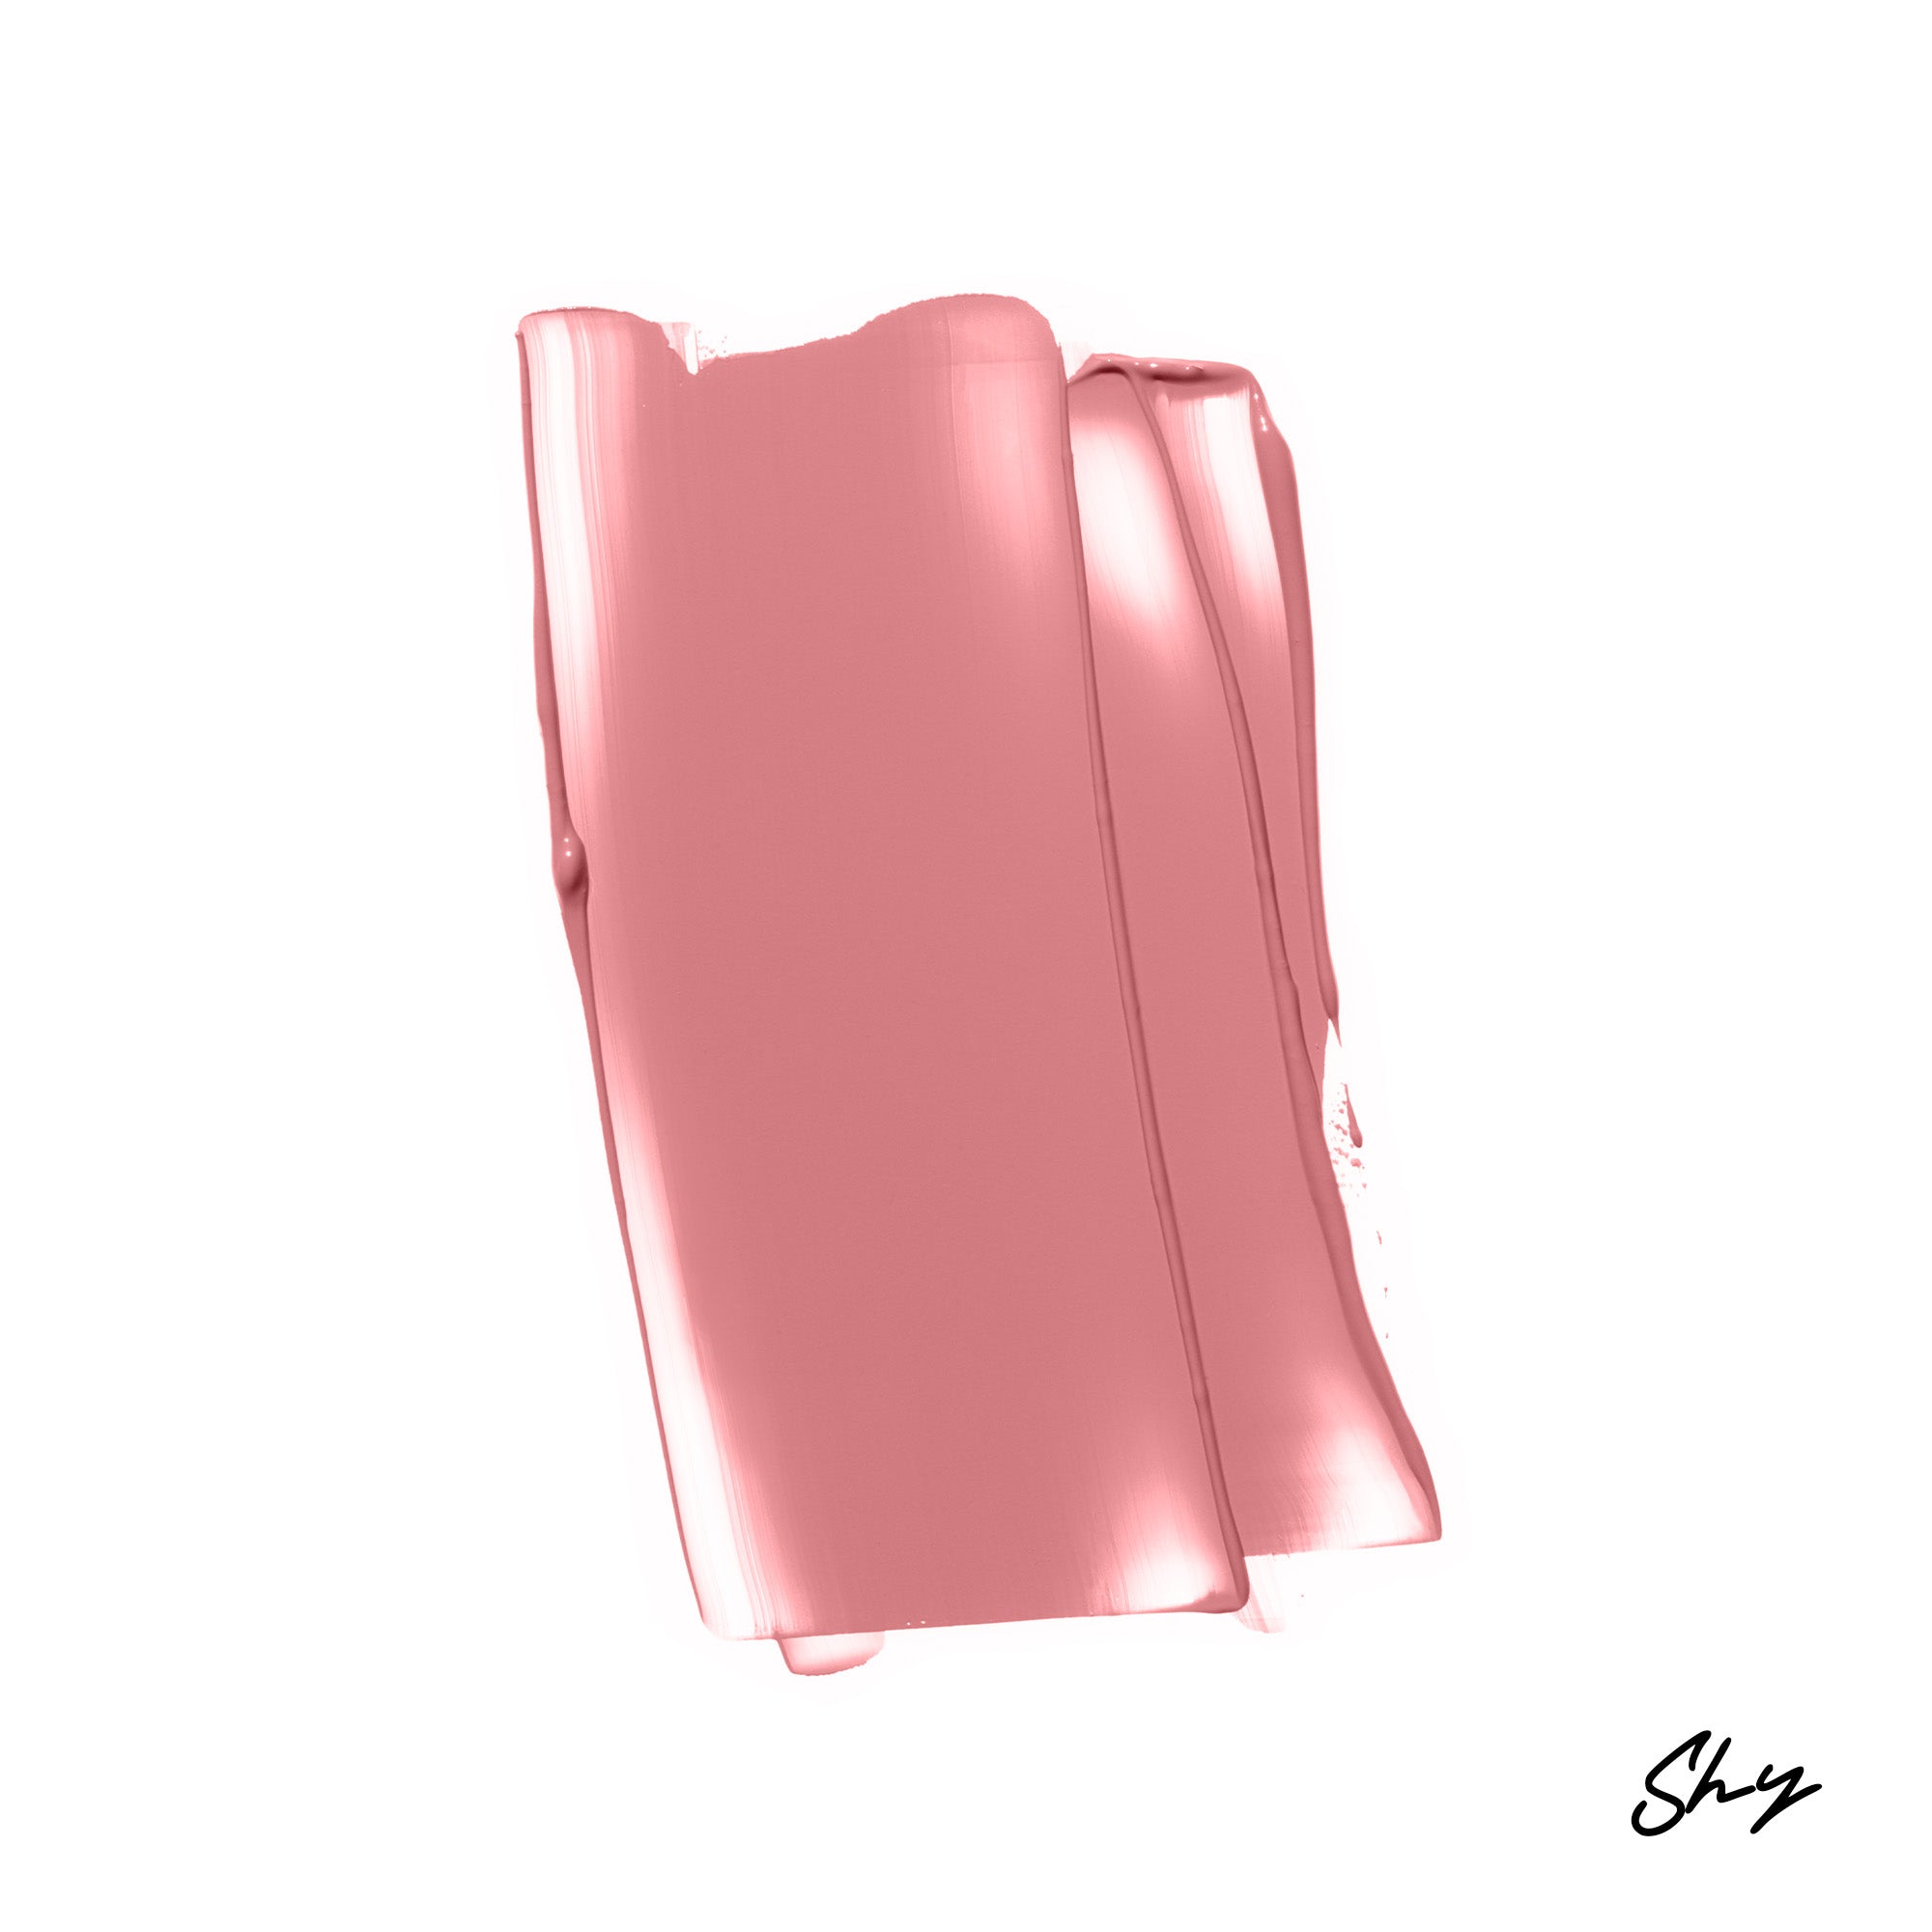 #color_shy (soft pink)